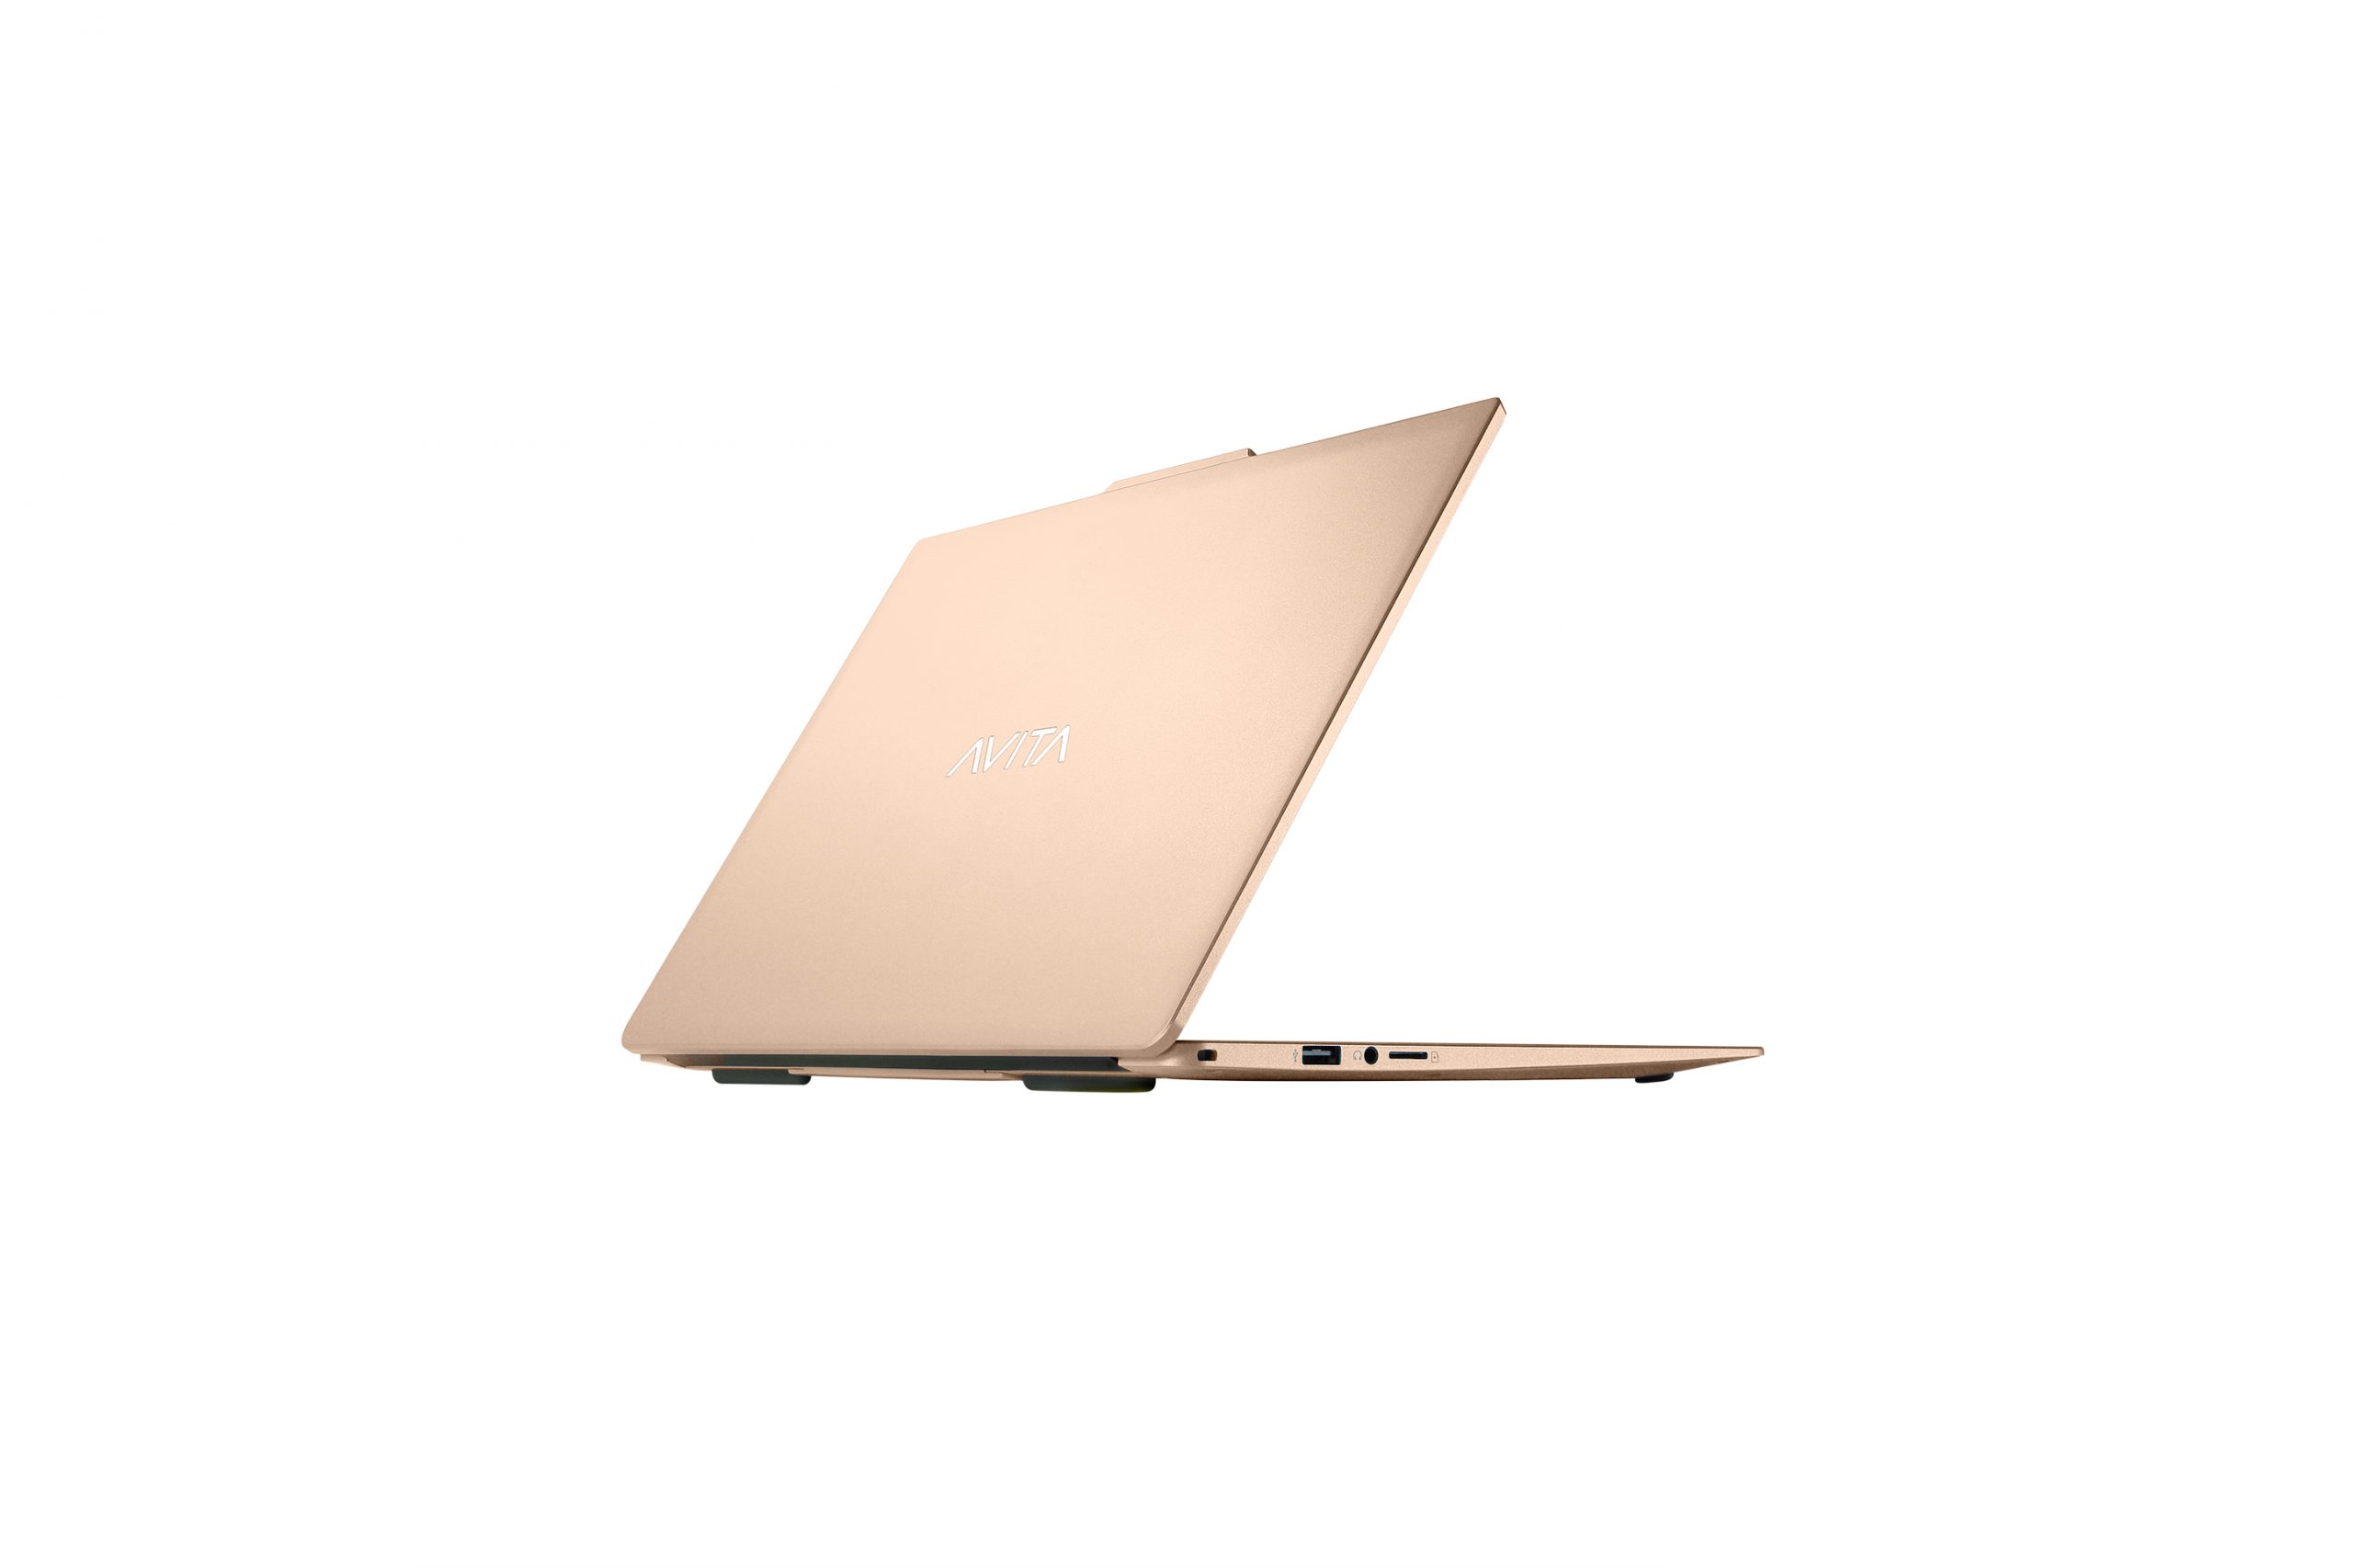 https://t2qwifi.com/wp-content/uploads/2020/07/avita_laptop_2020_angle2_0024_high_champagne-gold-1-scaled.jpg